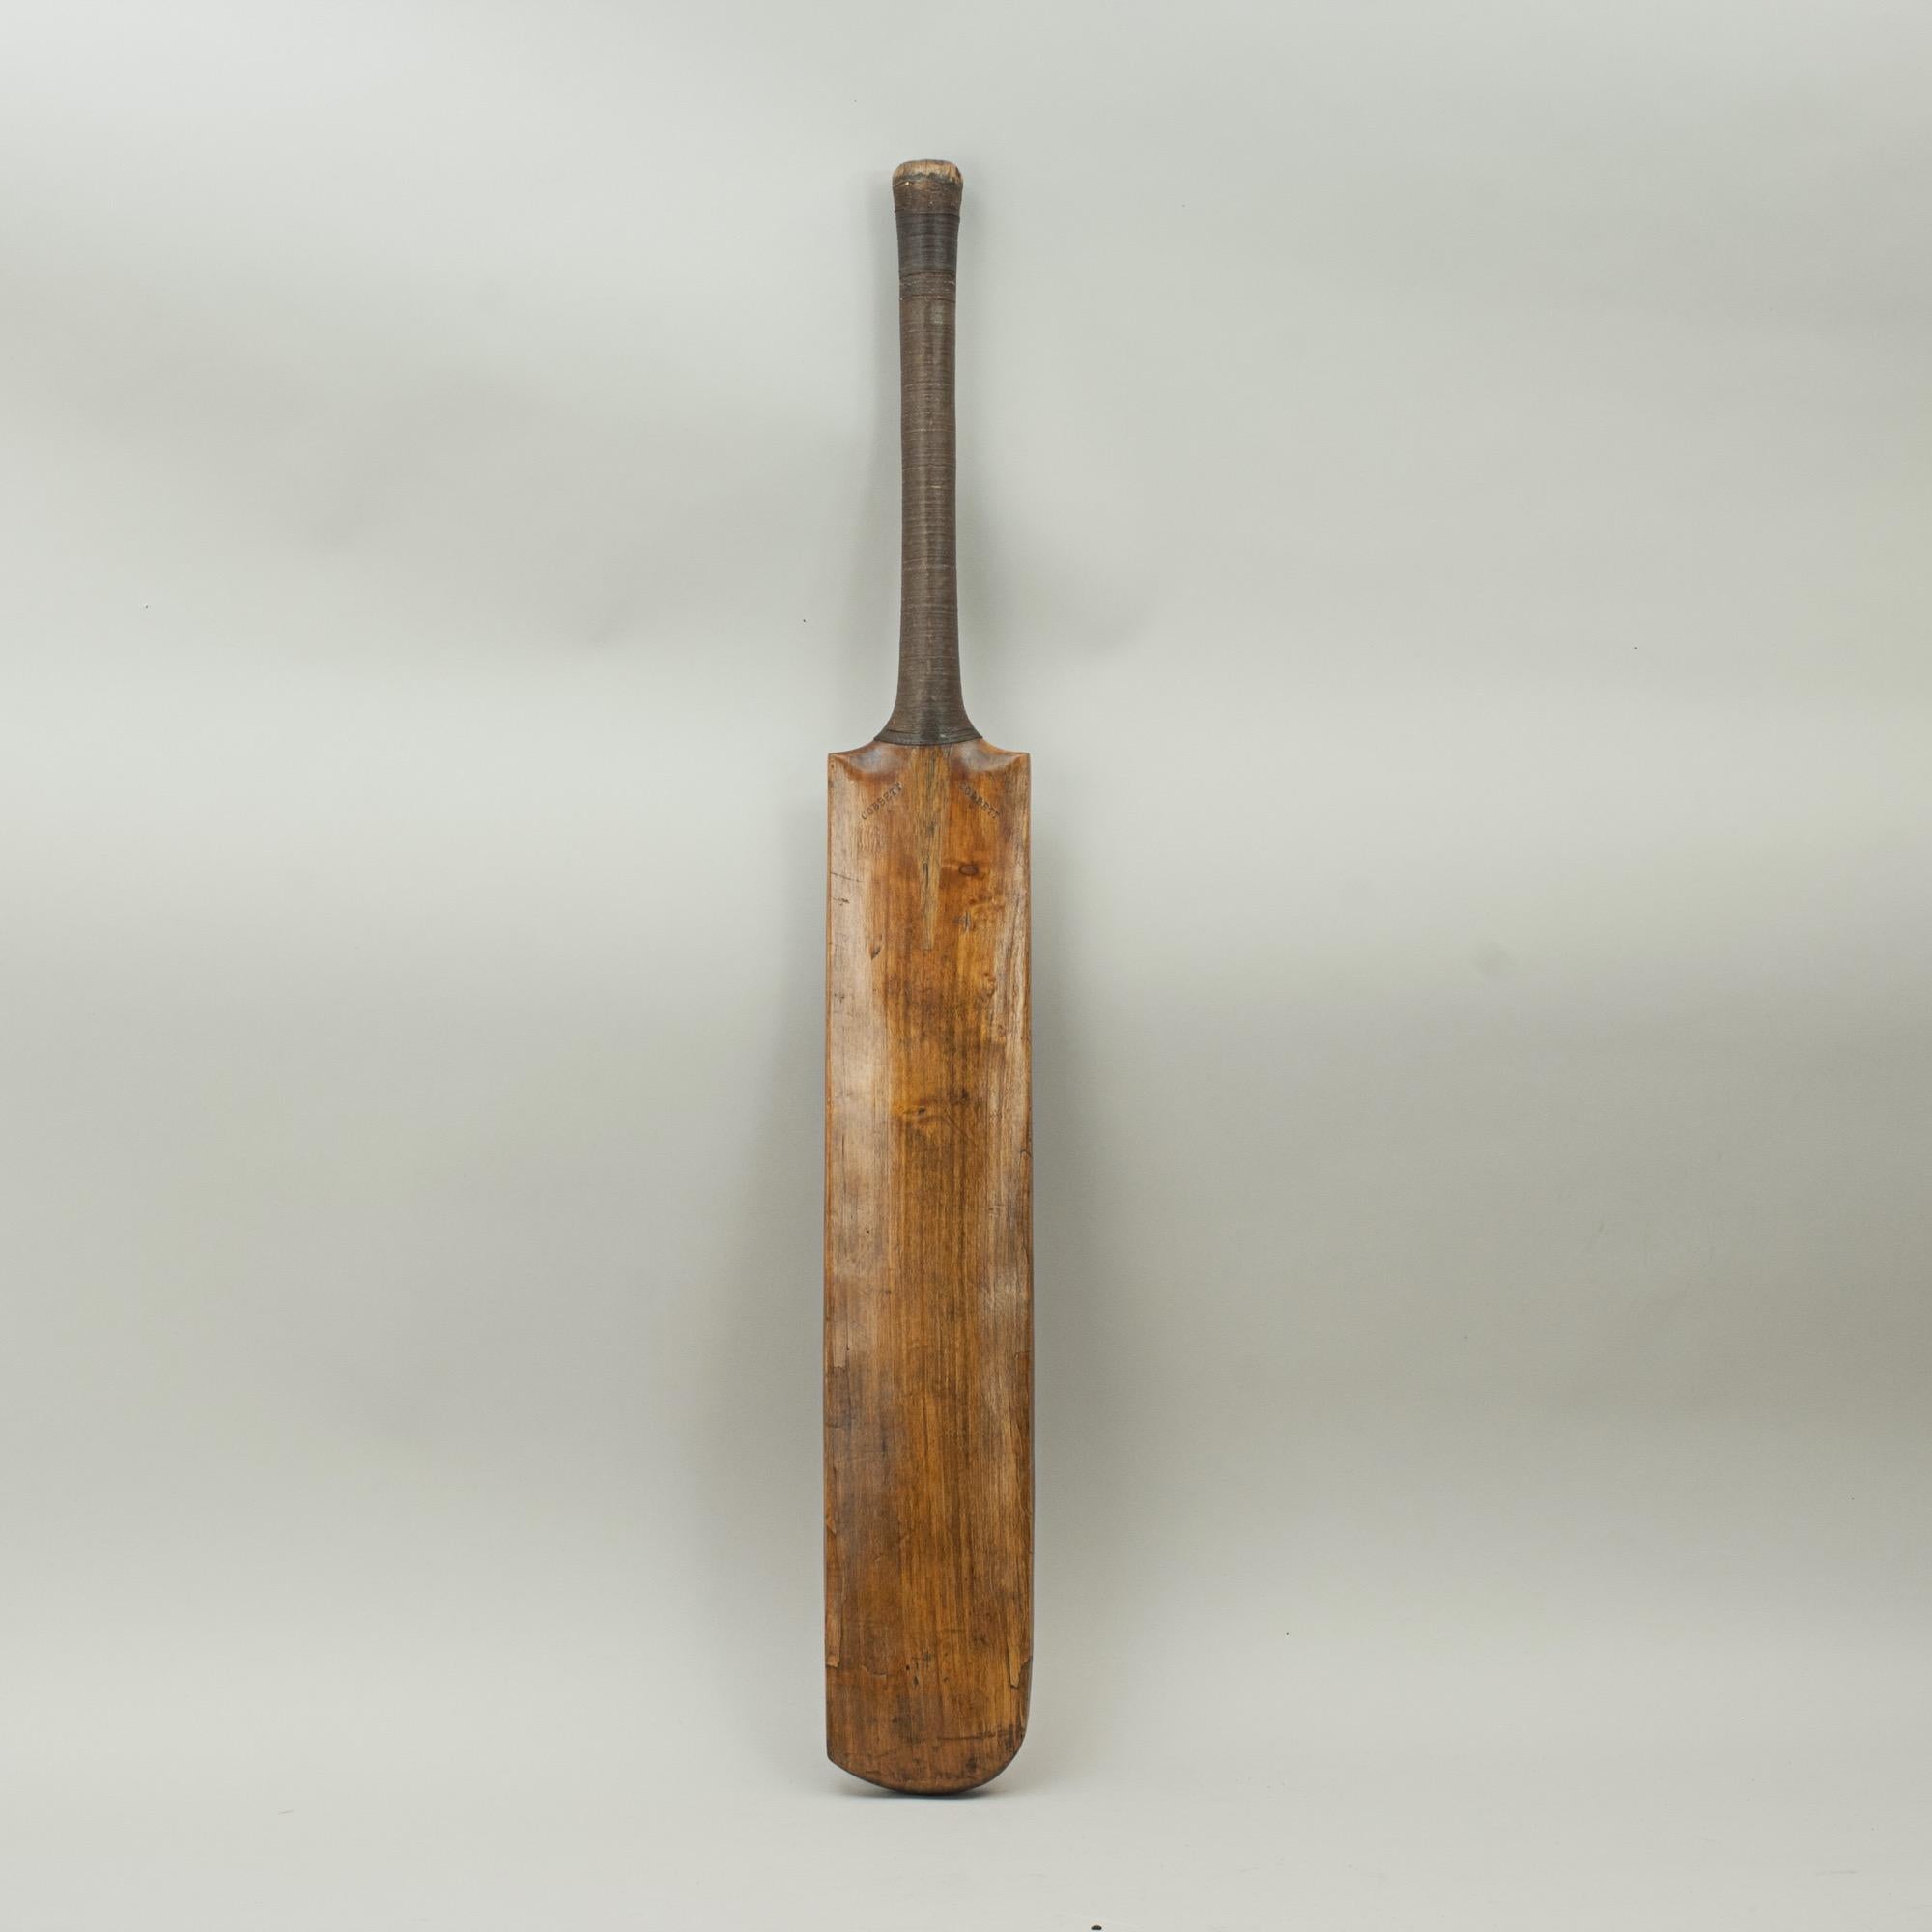 Antique Cobbett cricket bat.
A good Victorian cricket bat by Cobbett, in nice condition with good colouring and patina. The bat is with rounded shoulders and flat rounded back and with corded grip. The blade is stamped 'COBBETT' on both shoulders